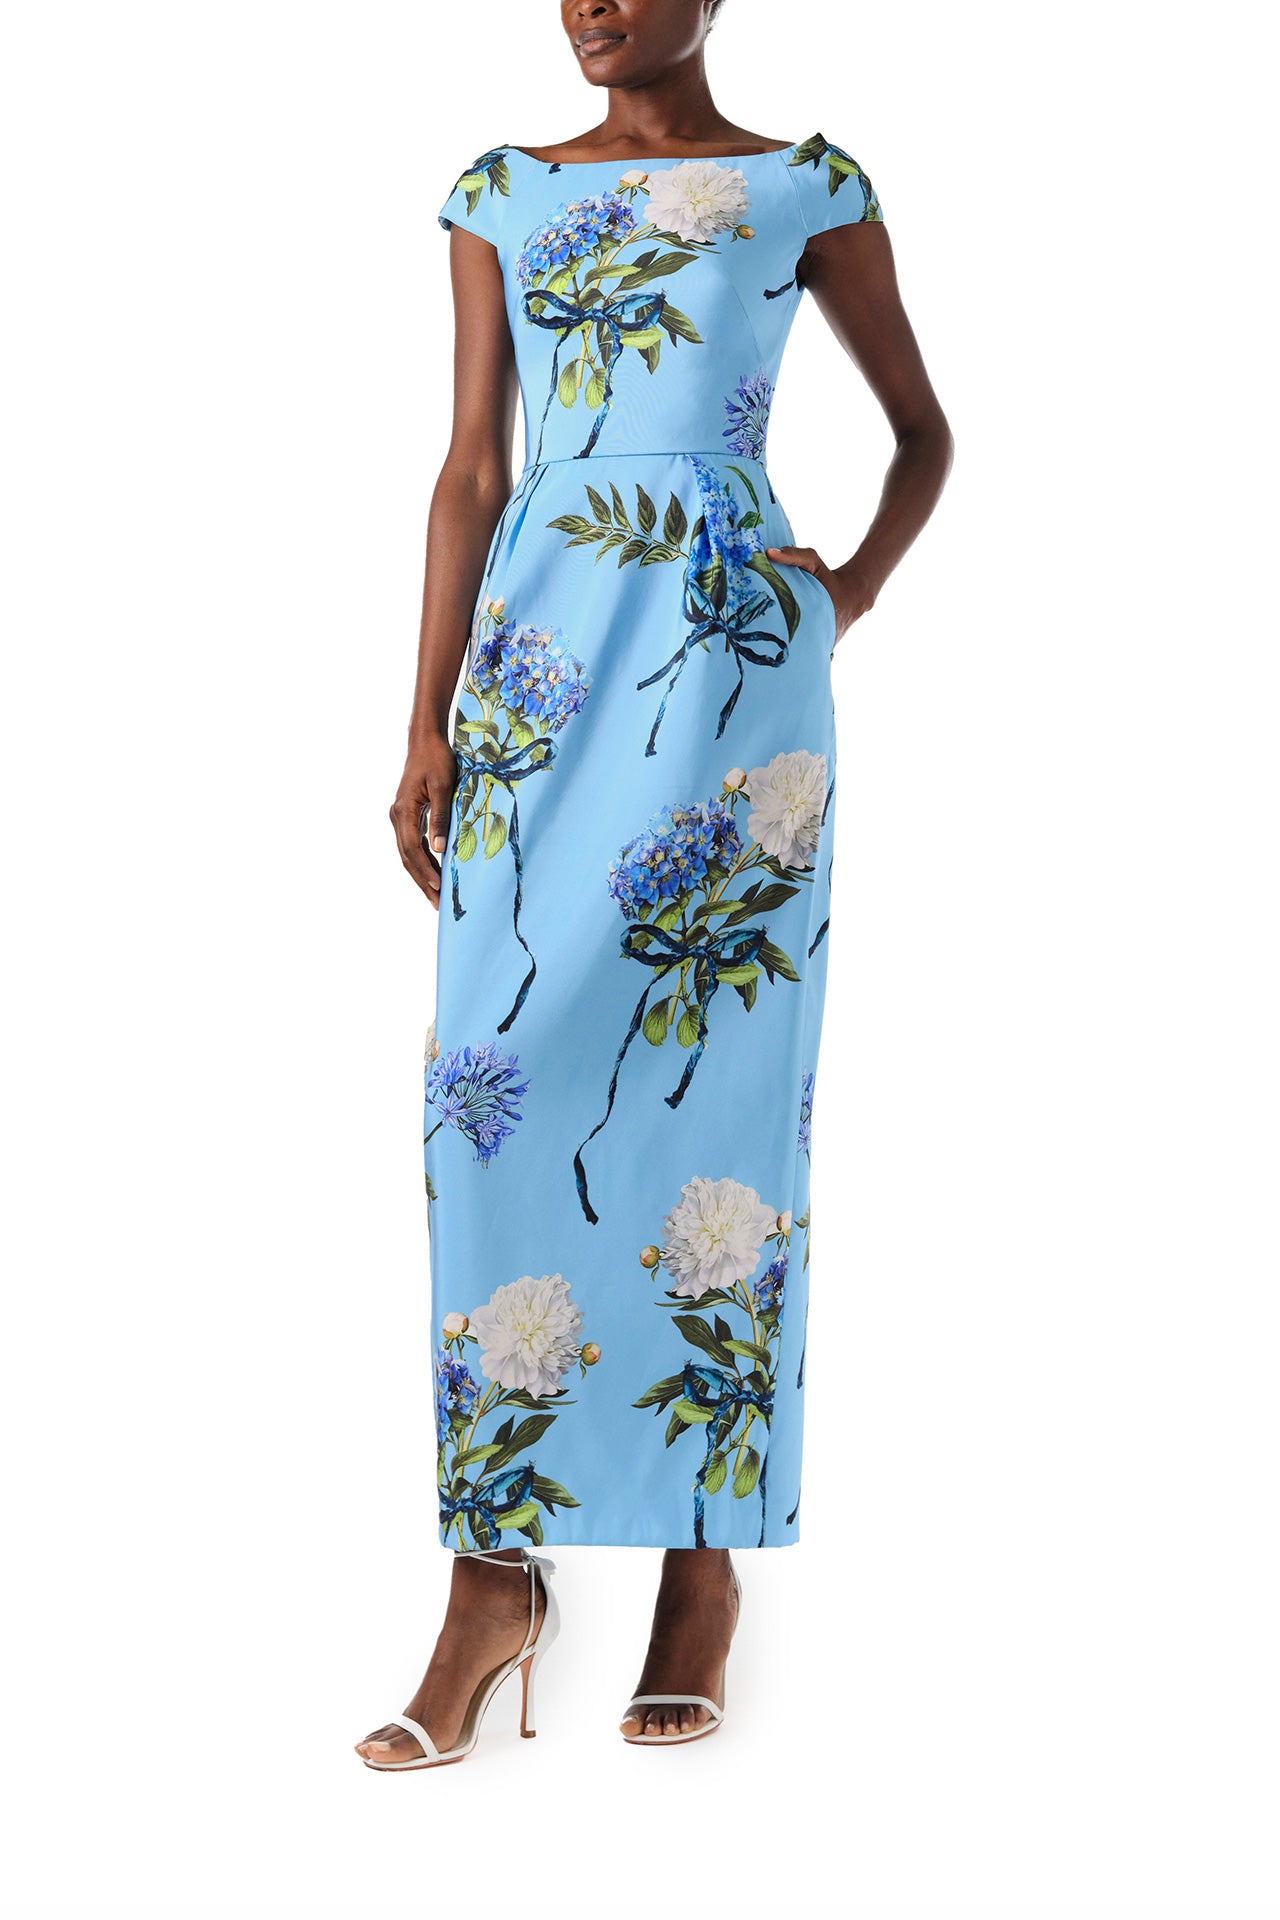 Monique Lhuillier Spring 2024 column gown with bateau neckline, cap sleeves and pockets in Sky Blue Hydrangea printed silk faille - angled.